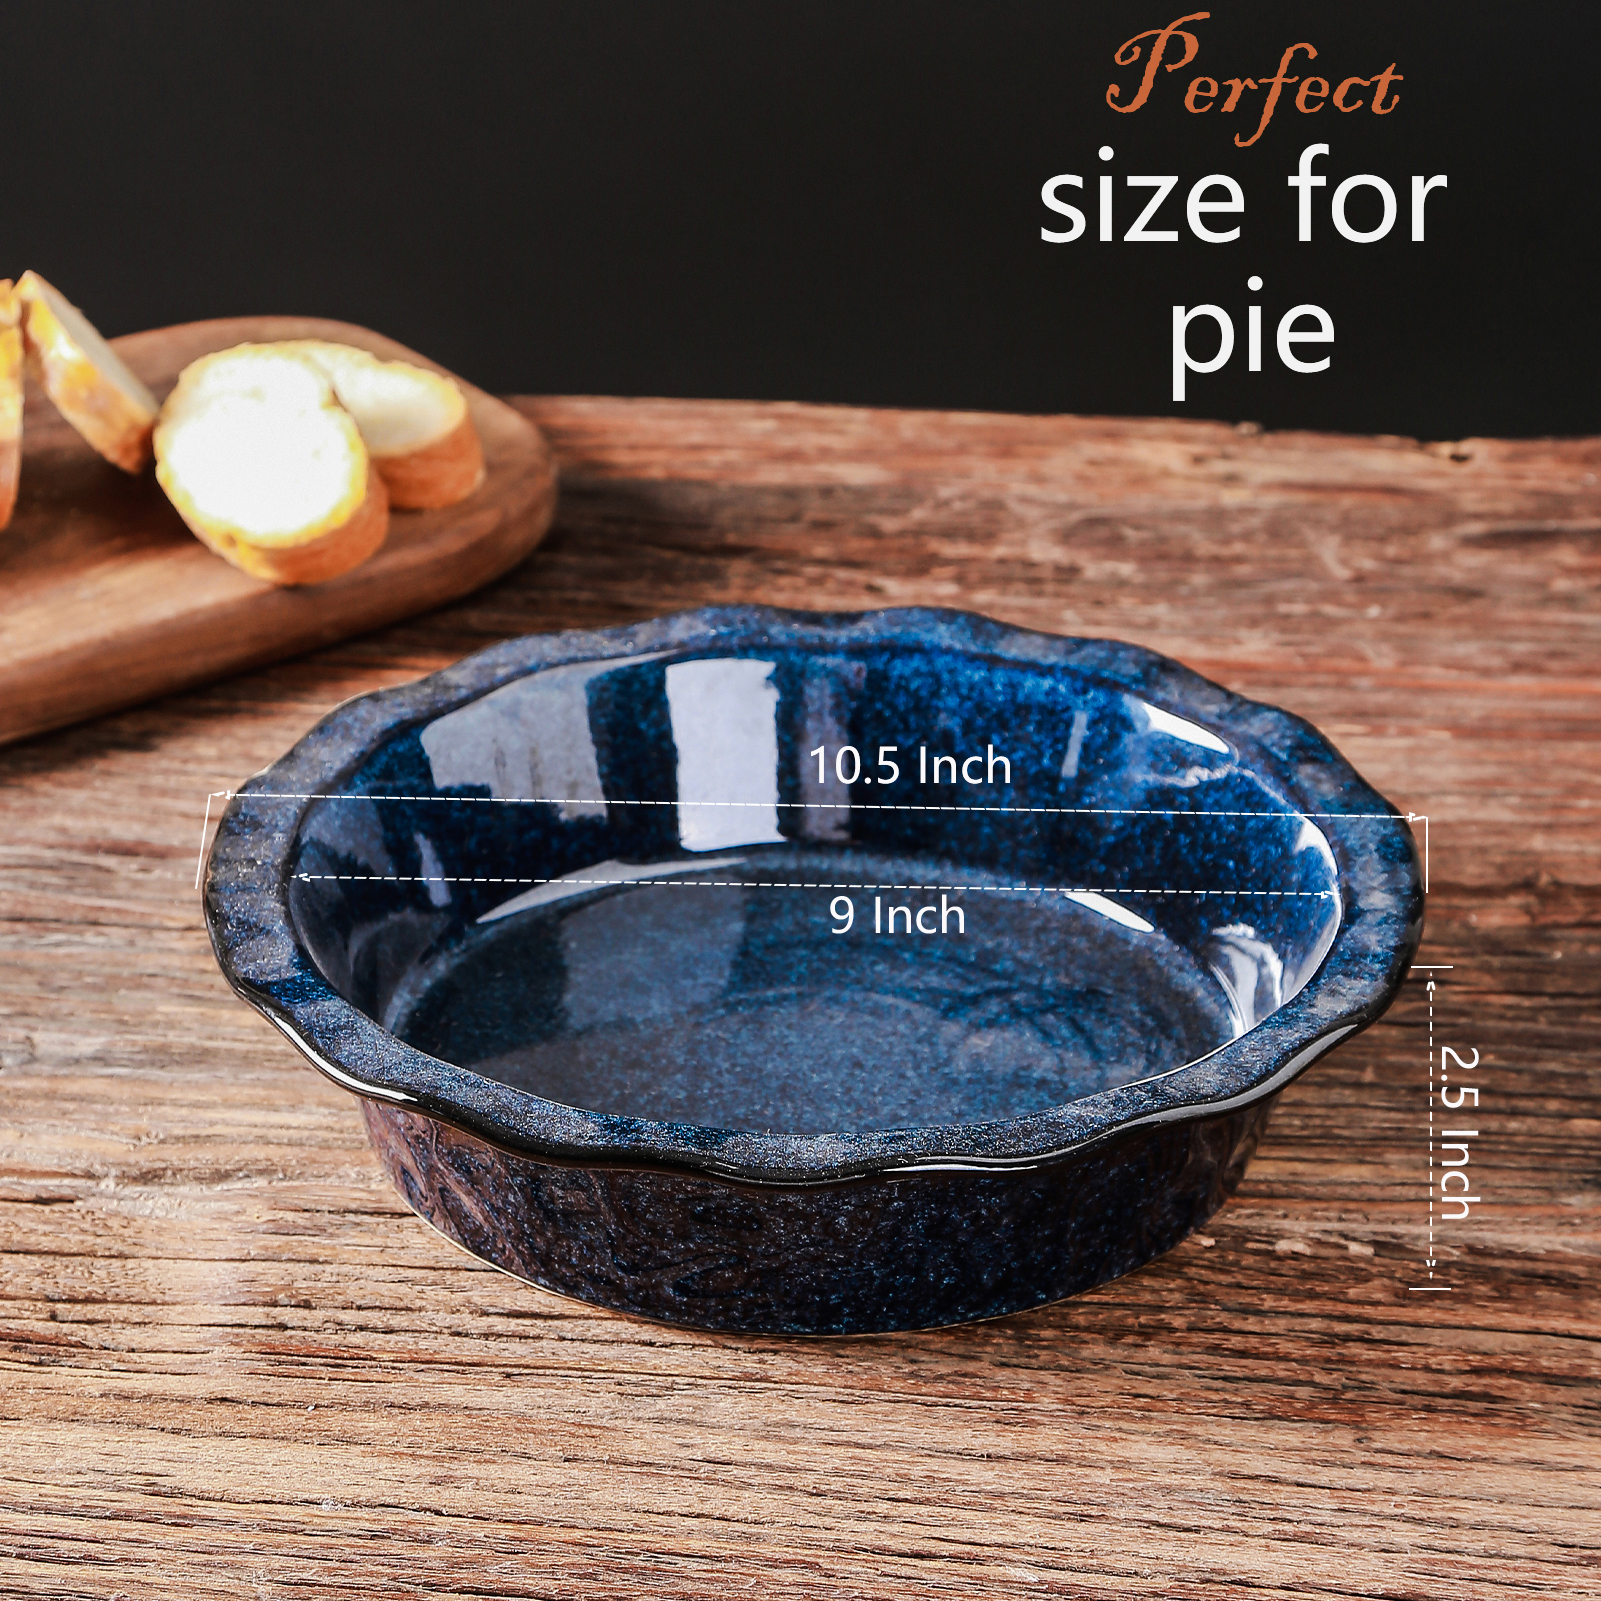 Cast Iron Pan Display, Holder, Pie Plate Rack, Pie Dish Display, for a Dish  With a Depth Between 1 3/4 to 2 1/2 and a Dia. 8 to 12 